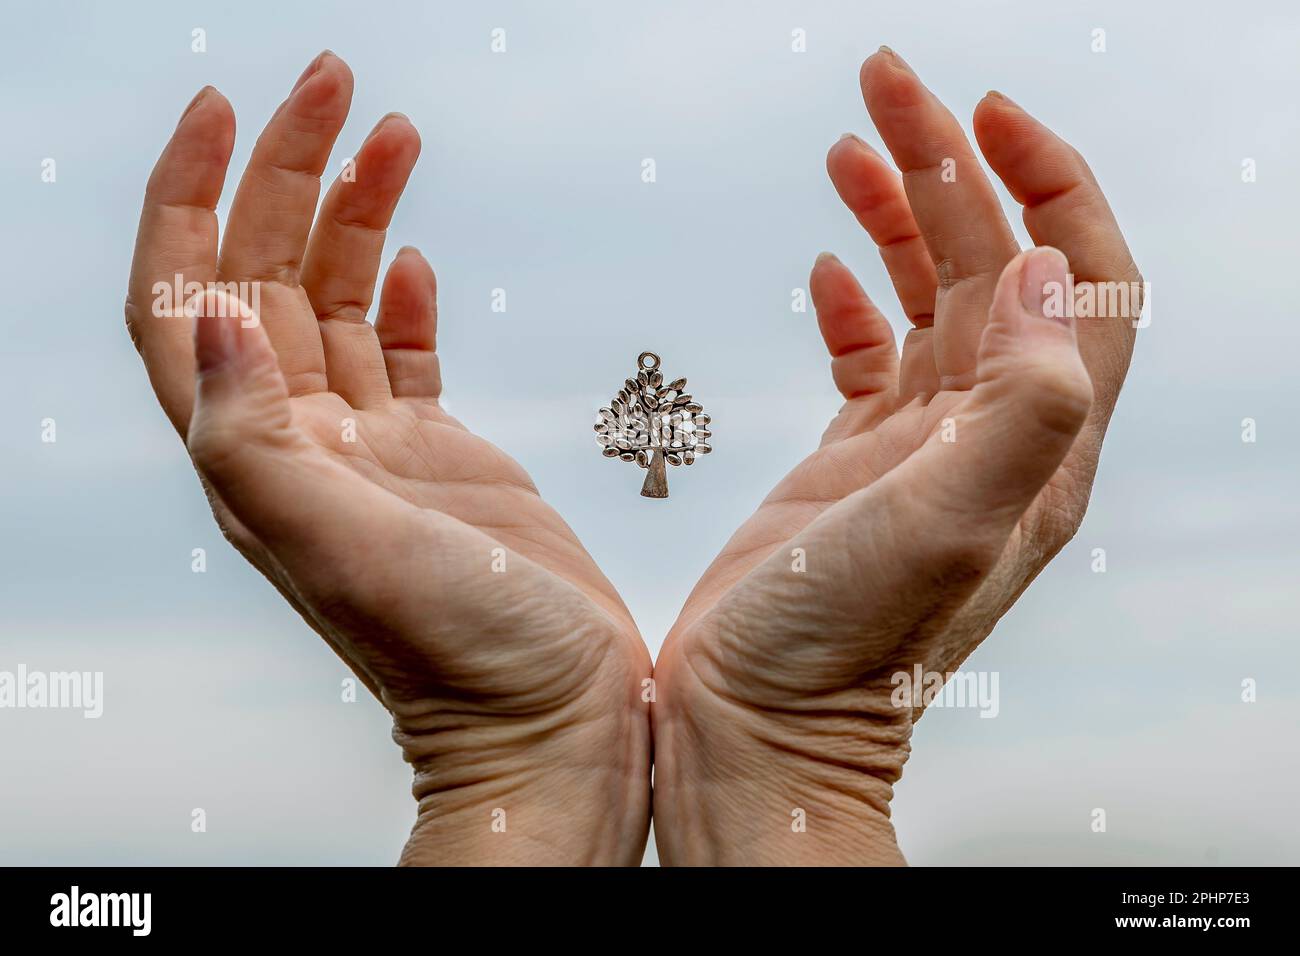 A silver pendant in the shape of a tree of life floats in the air between the palms of a woman's hands Stock Photo